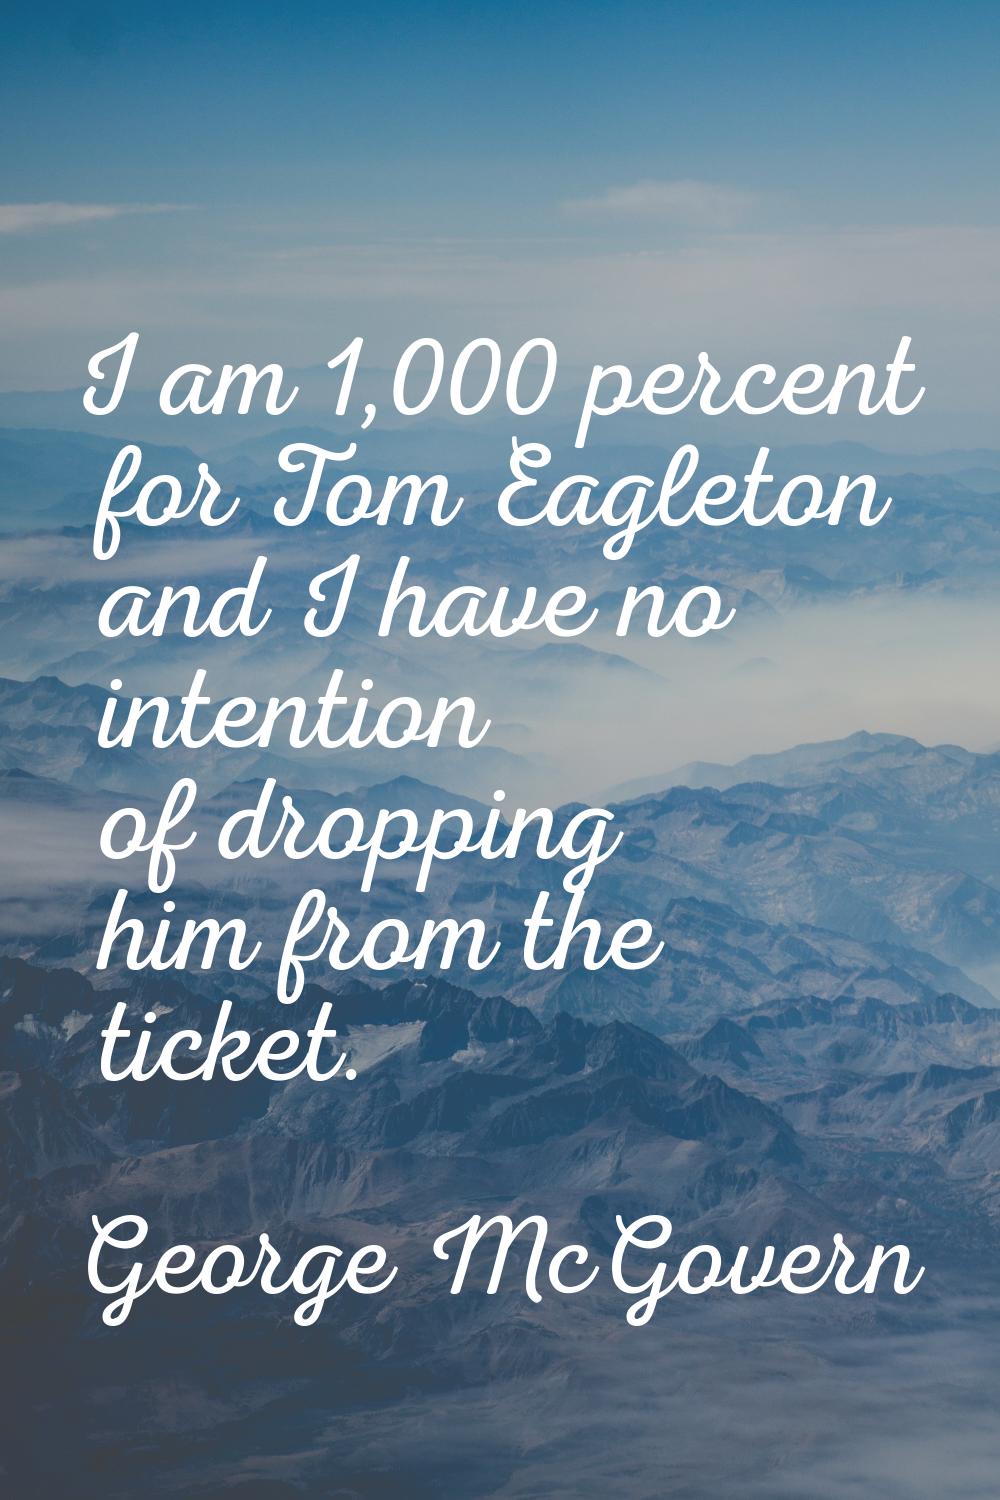 I am 1,000 percent for Tom Eagleton and I have no intention of dropping him from the ticket.